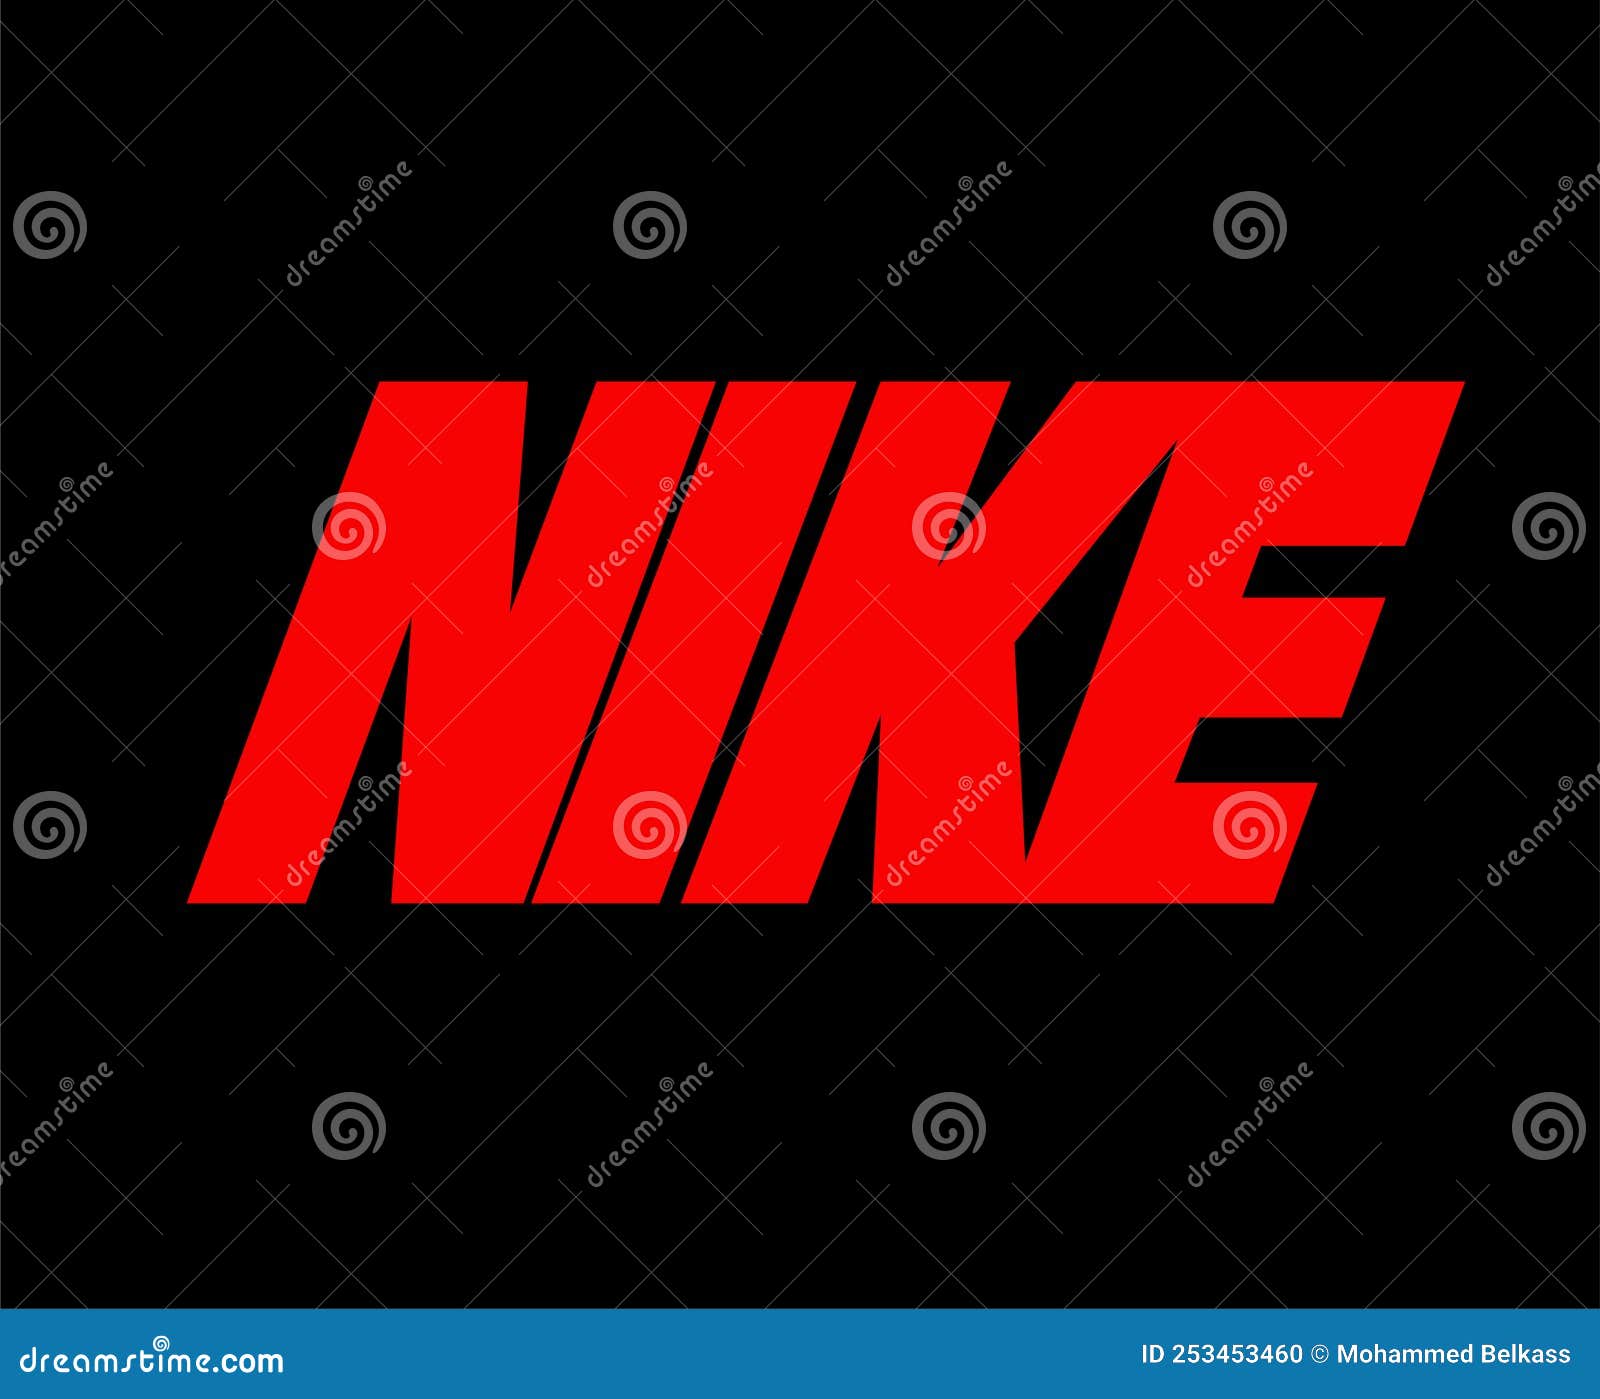 Nike Logo Name Red Clothes Icon Abstract Football Vector Editorial Image - Illustration of player, confederation: 253453460